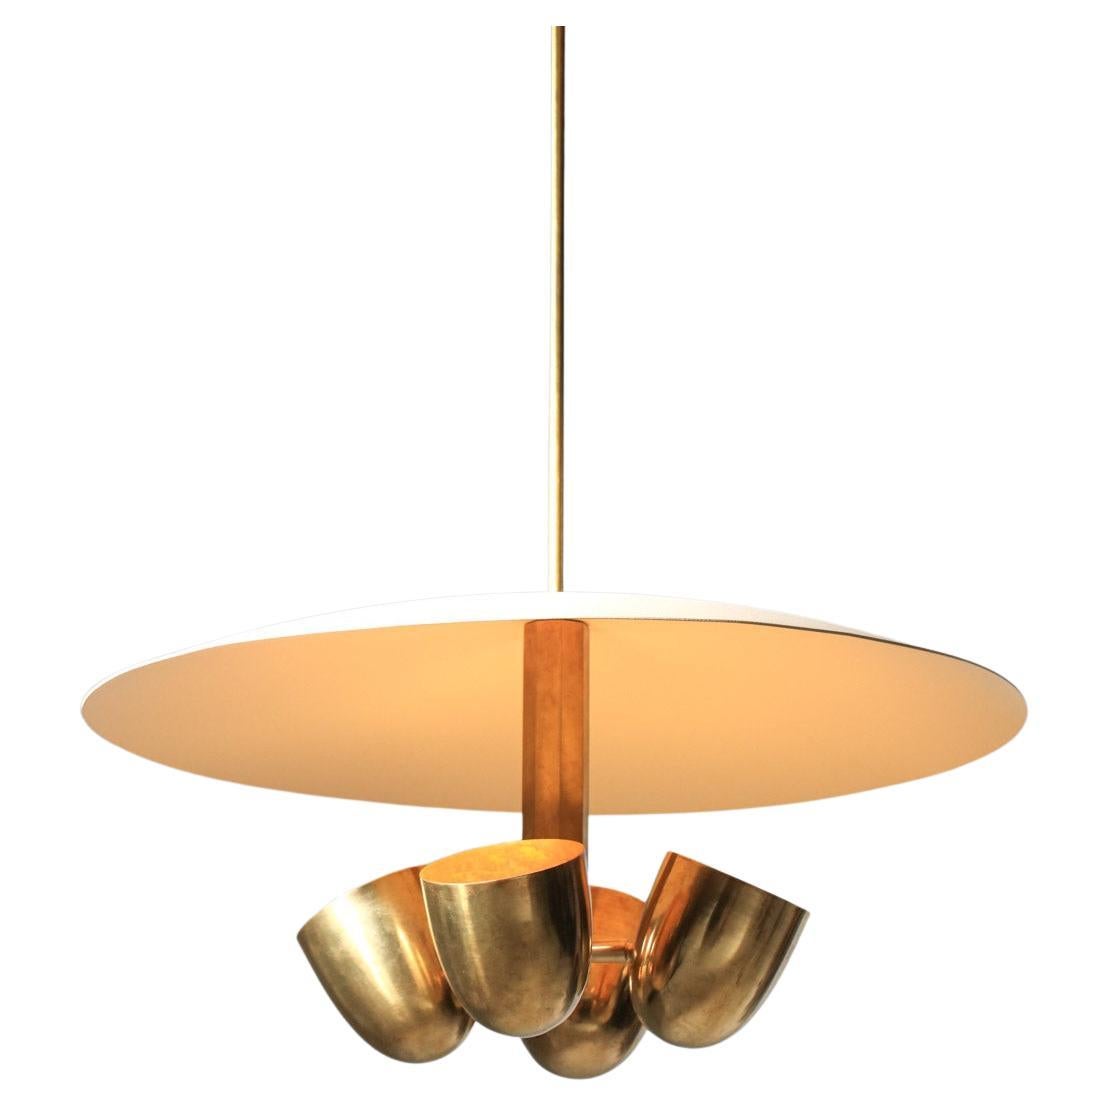 Modern vintage style pendant light in solid brass and lacquered metal